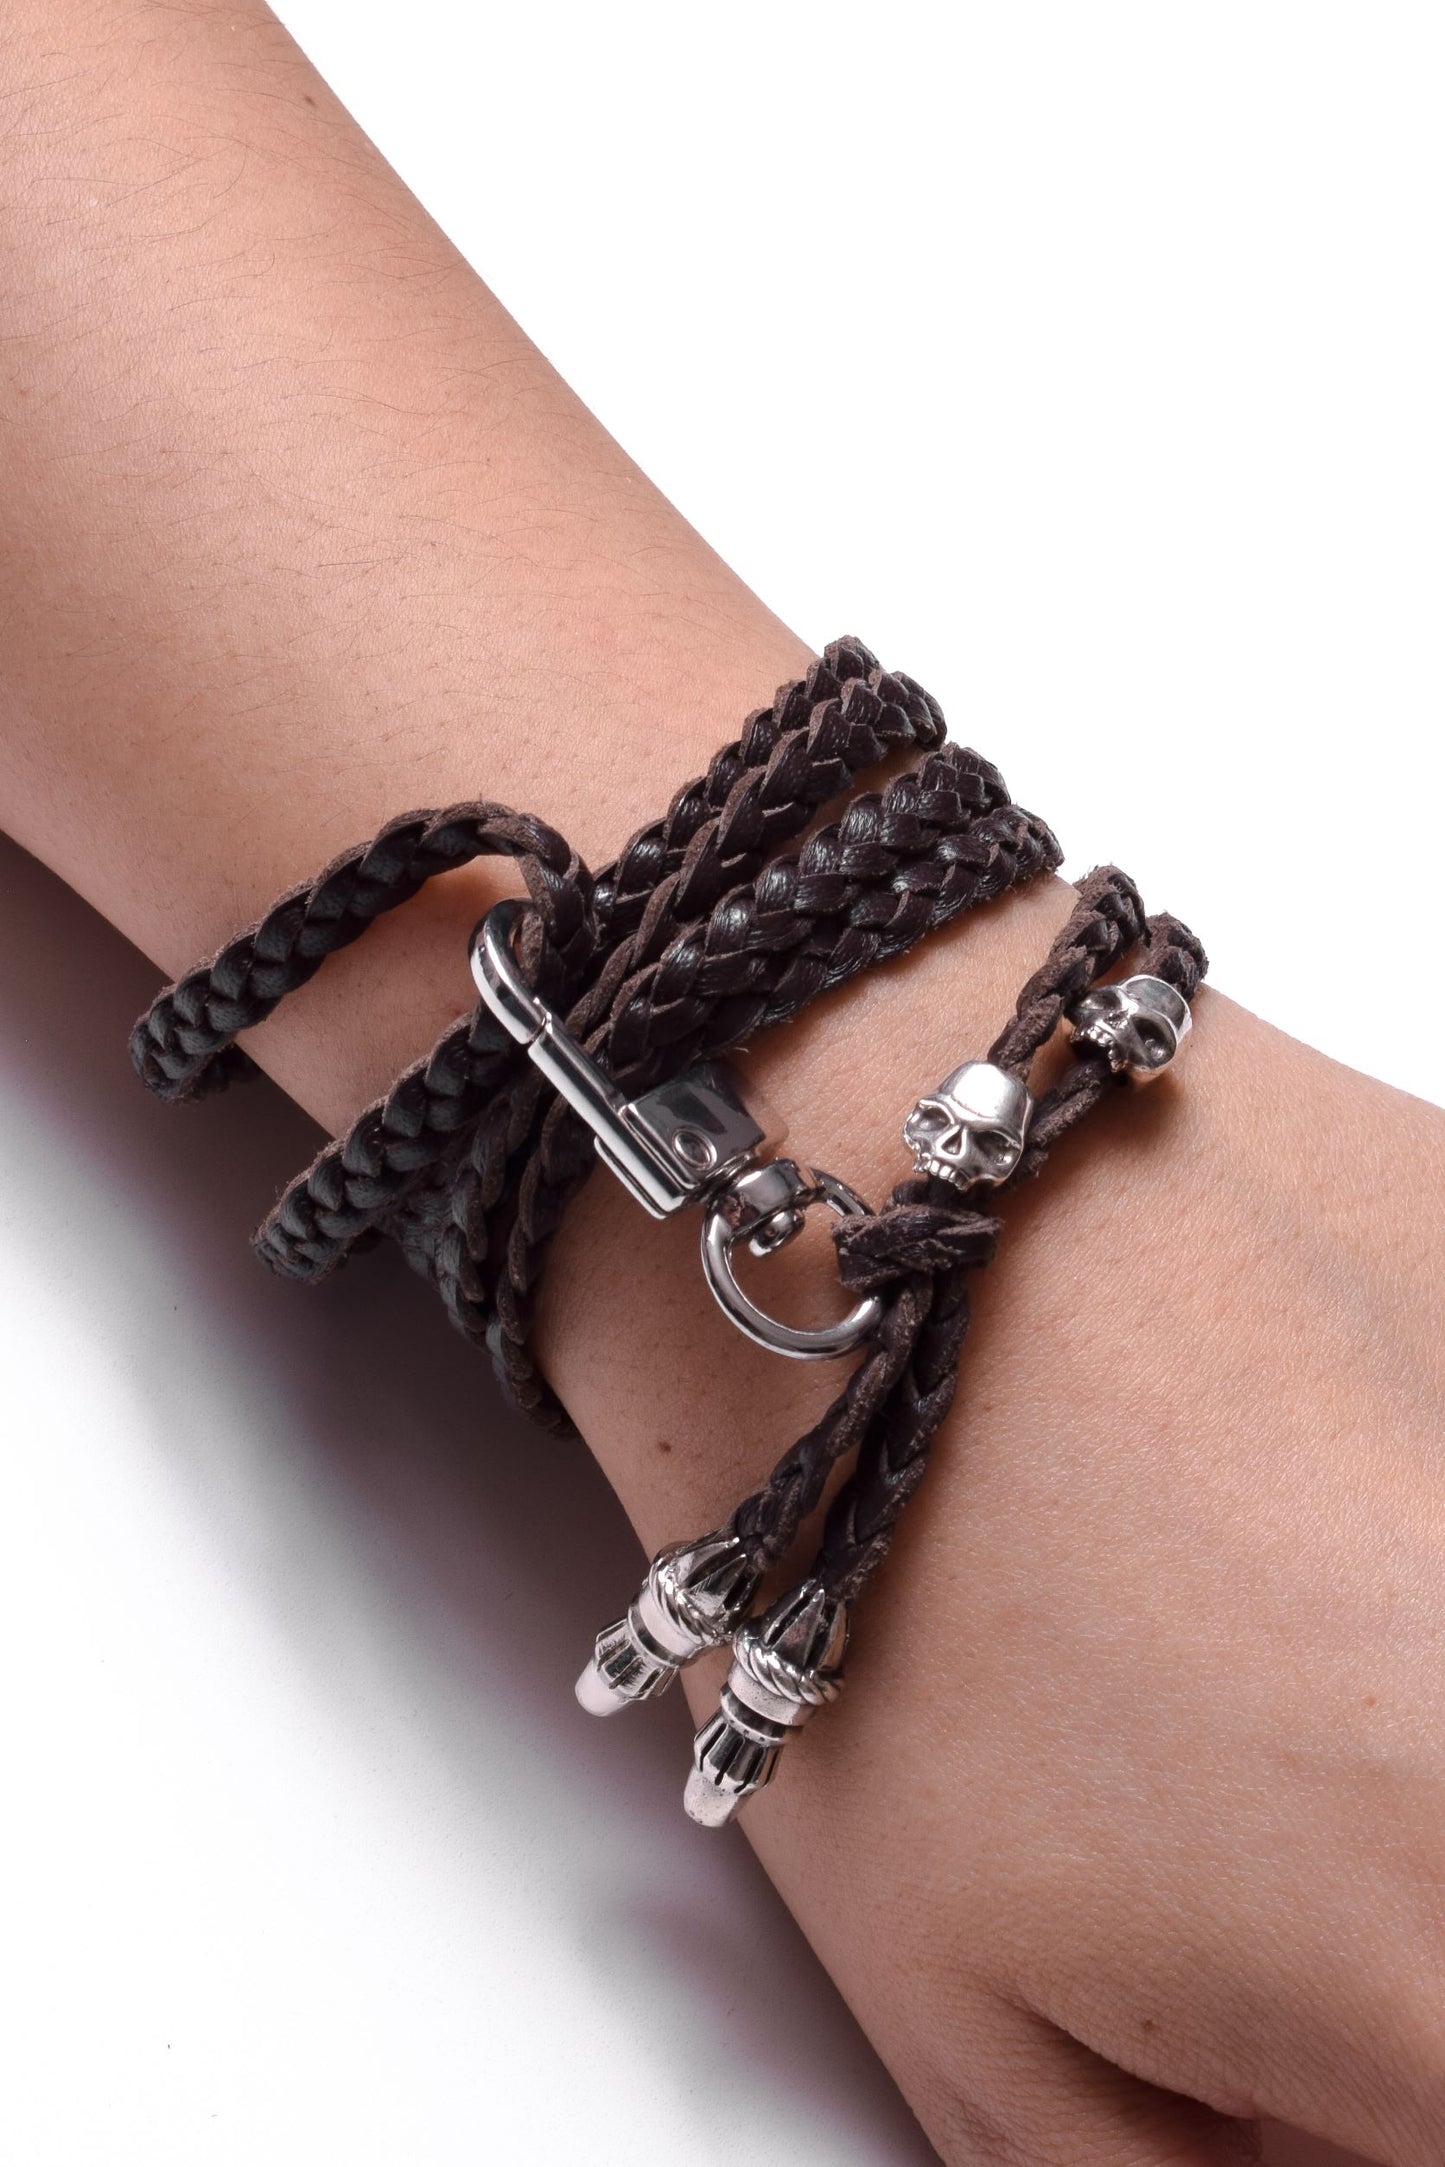 Laser-engraved Silicone Smartphone Support & Genuine Leather Bracelet/Crossbody/Necklace 3 Double hand-braided Strands, Brown or Black. 2 Skulls and 2 Rope terminals, all 925 Sterling Silver.- S30